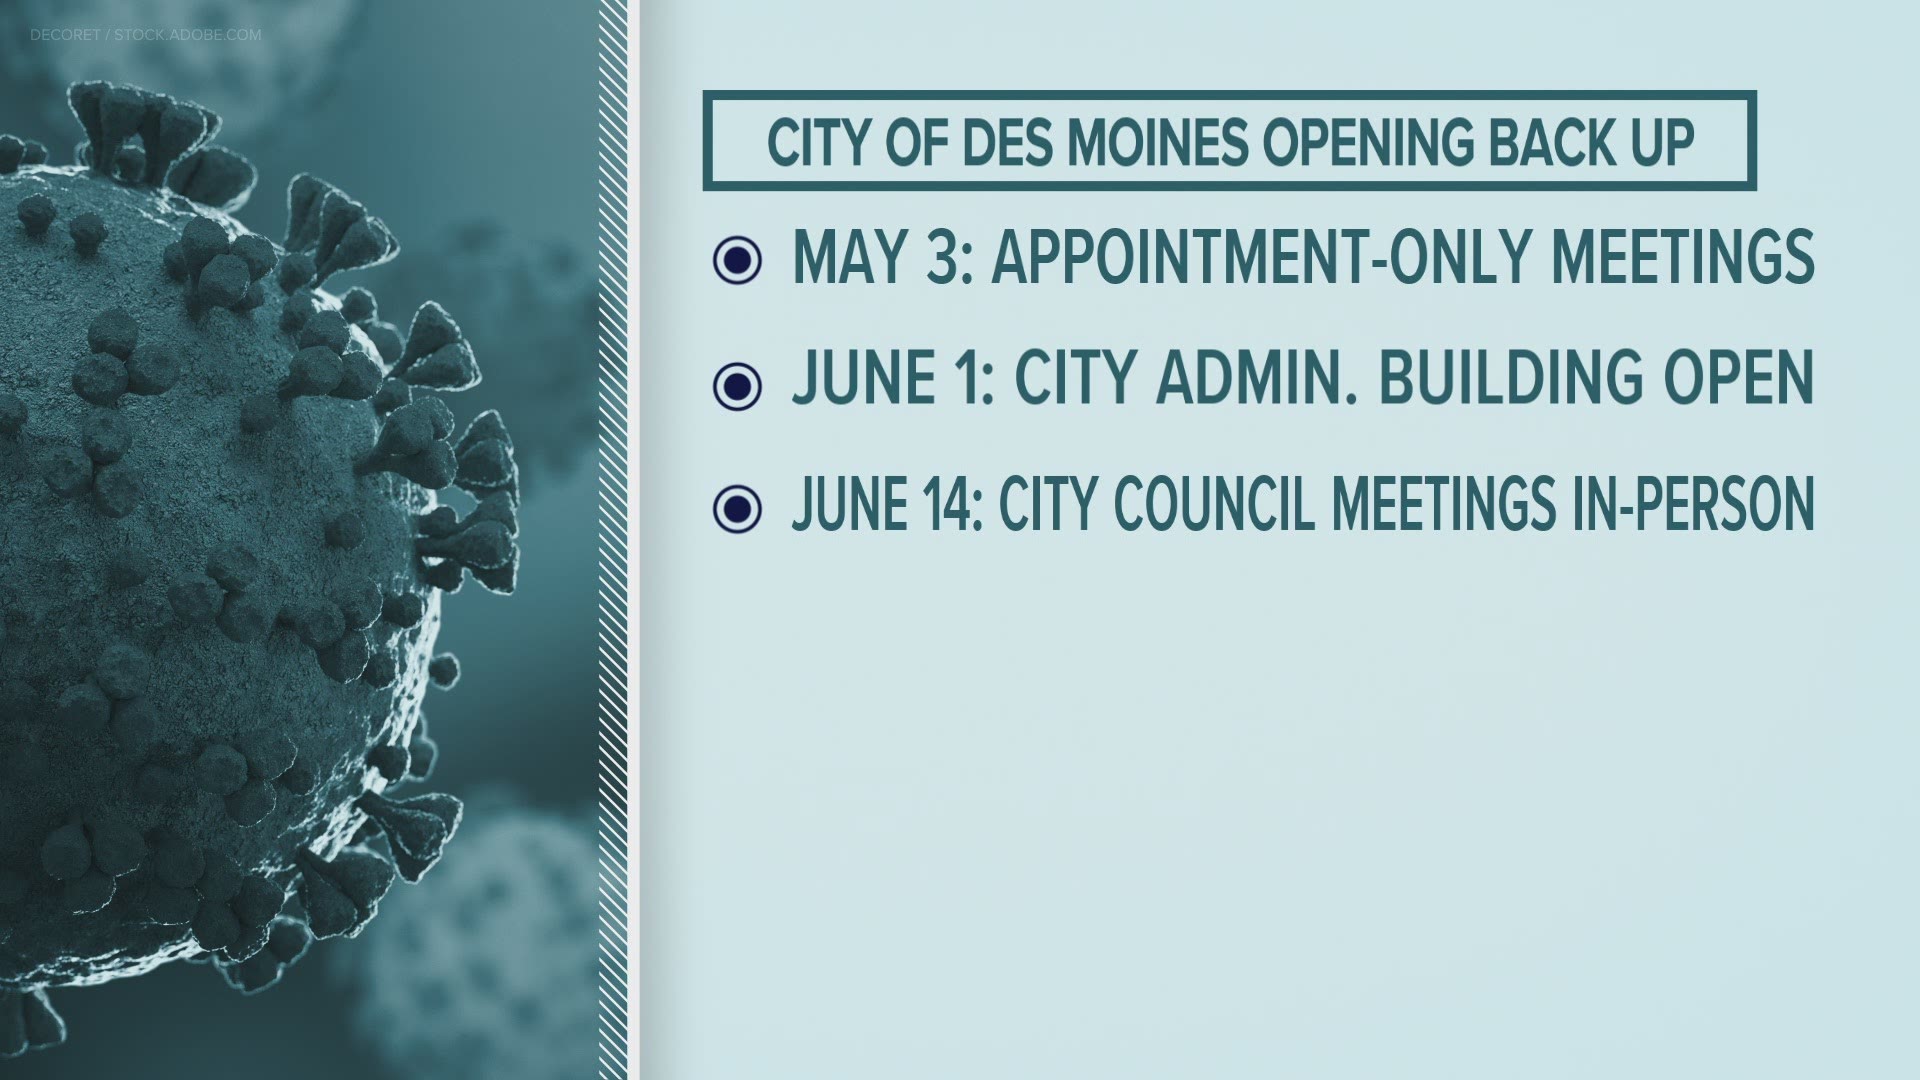 The city will allow the public to meet with staff on an appointment-only basis starting May 3.